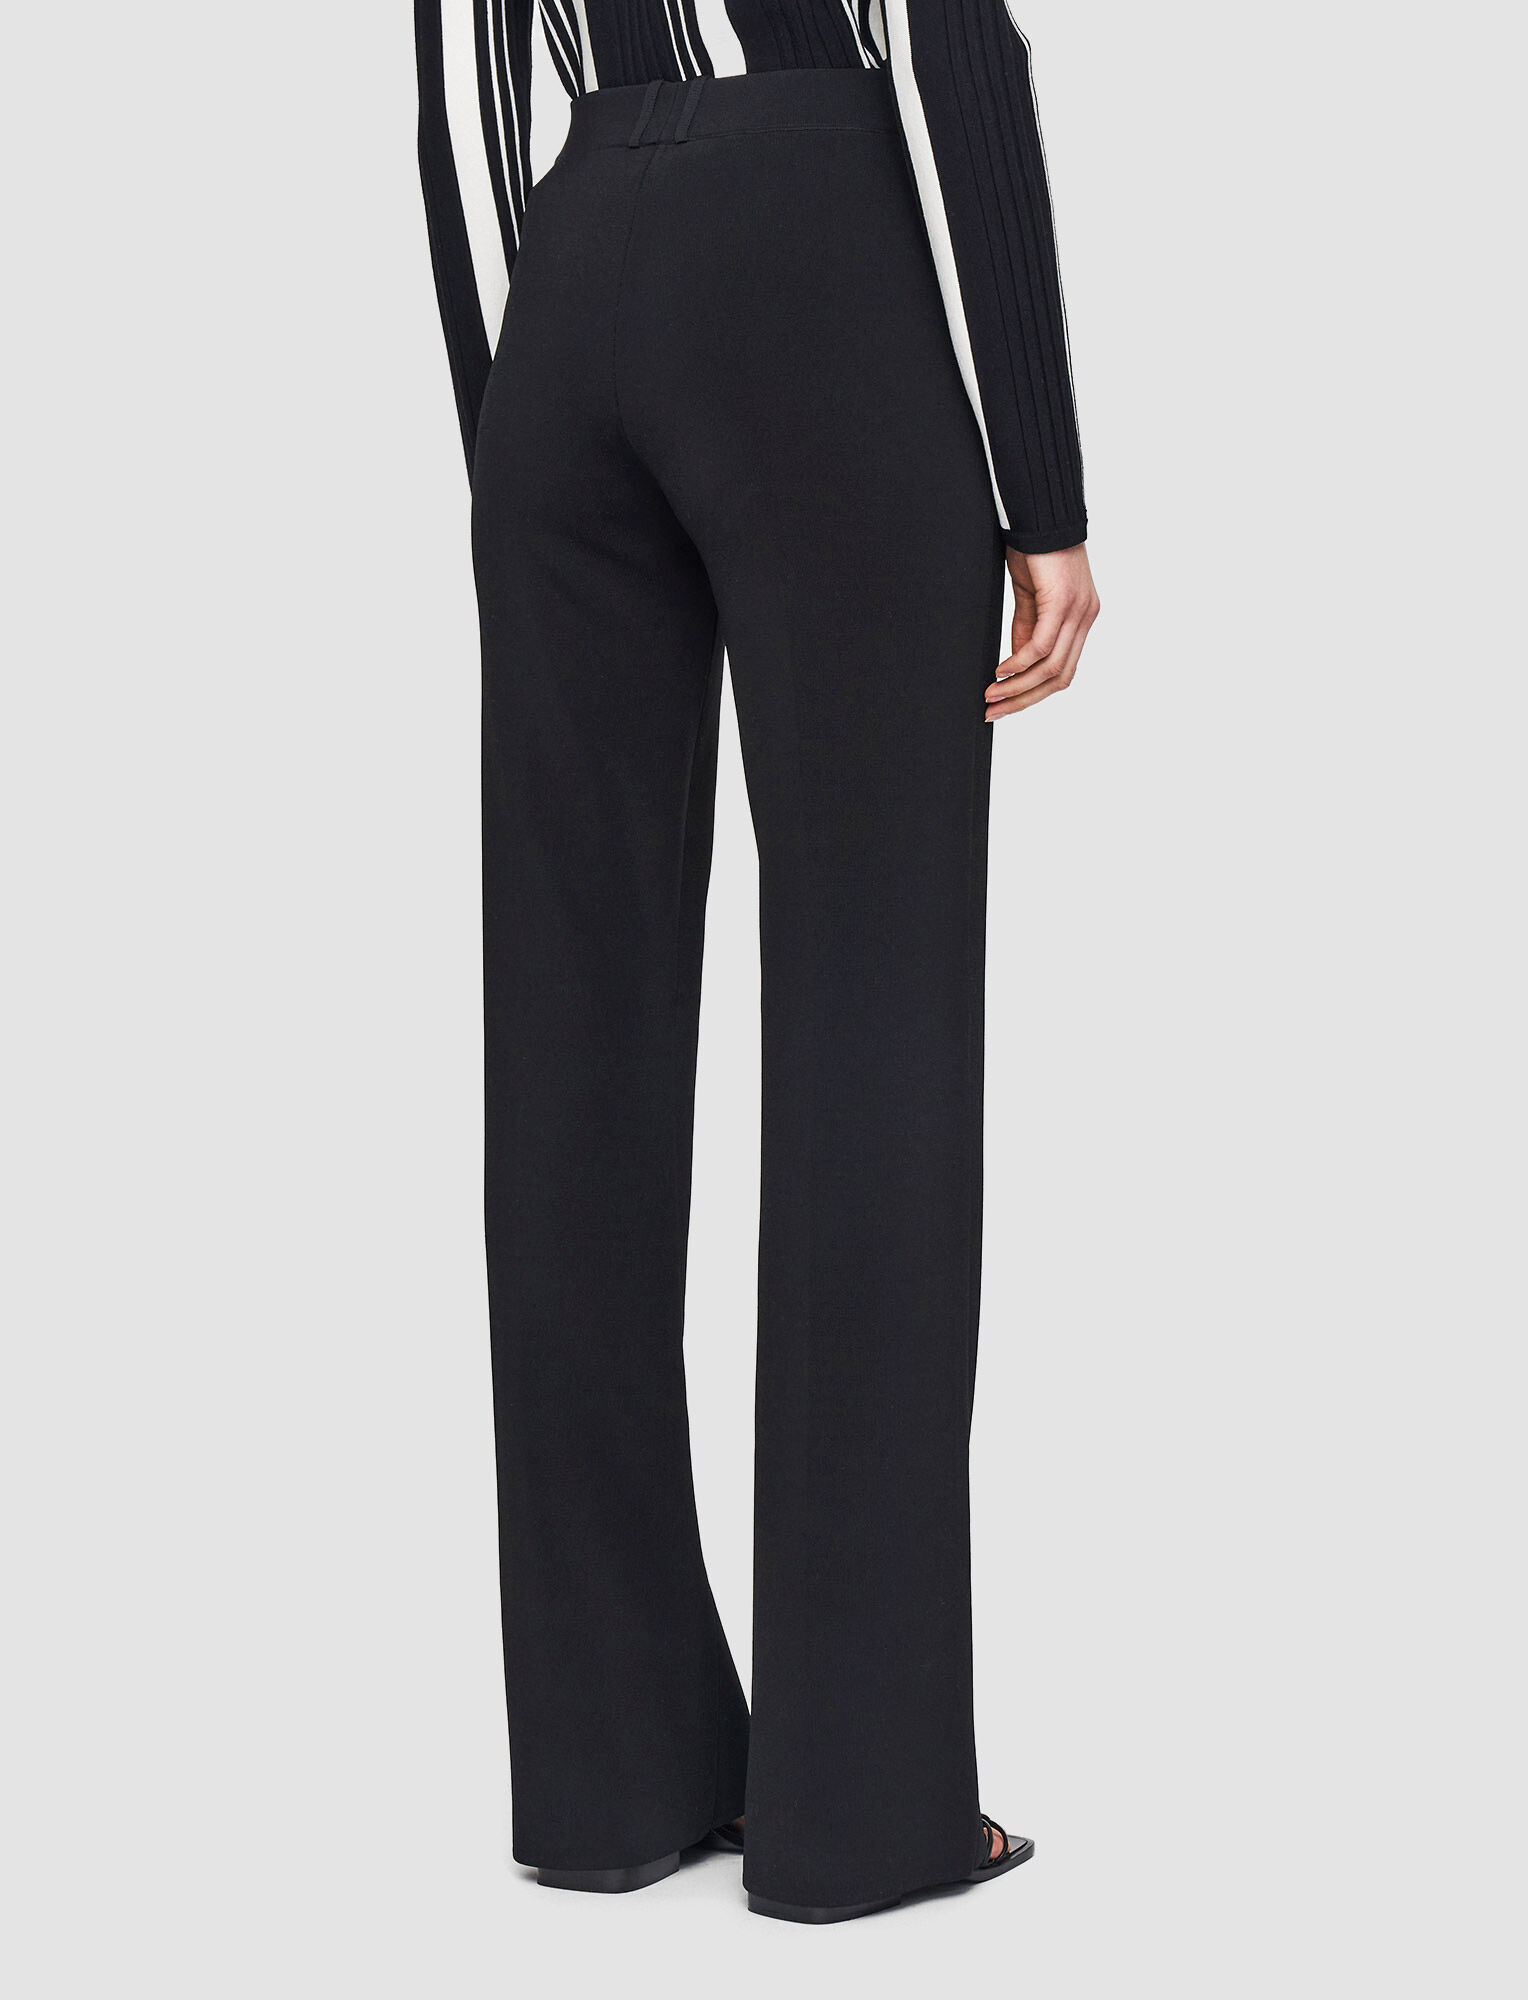 Joseph, Milano Knitted Trousers, in Black